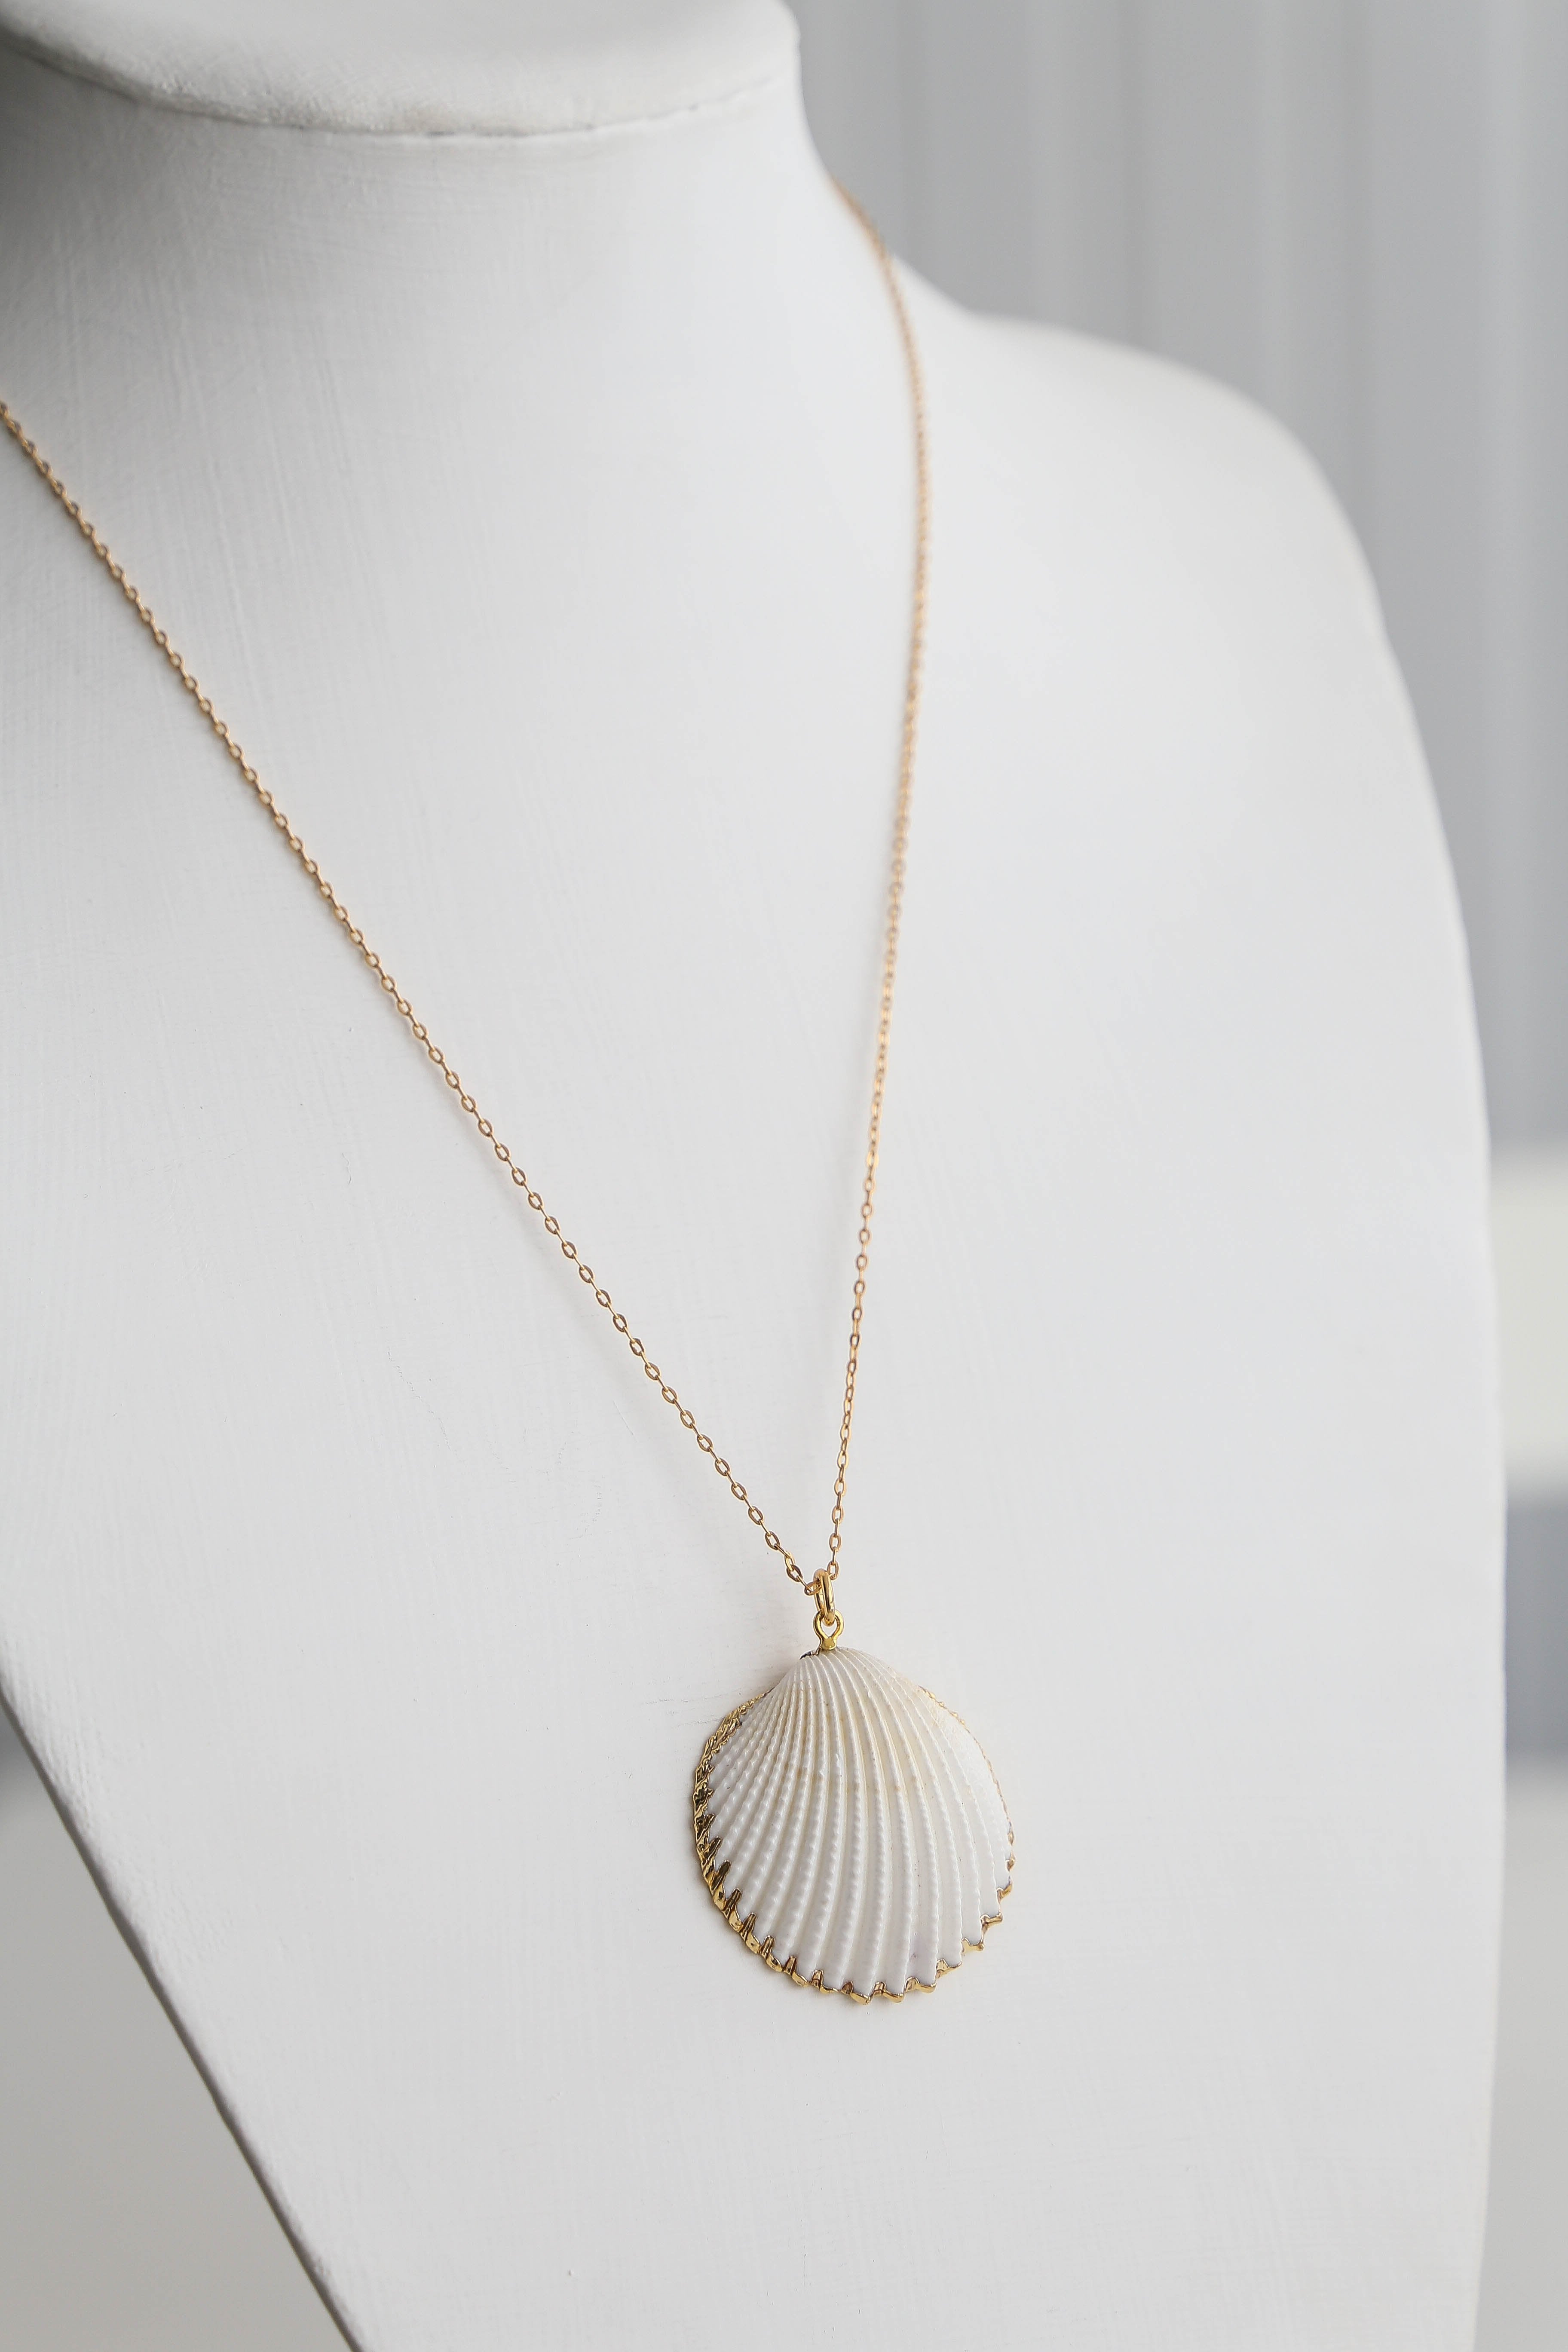 White & Gold Necklace - Boutique Minimaliste has waterproof, durable, elegant and vintage inspired jewelry